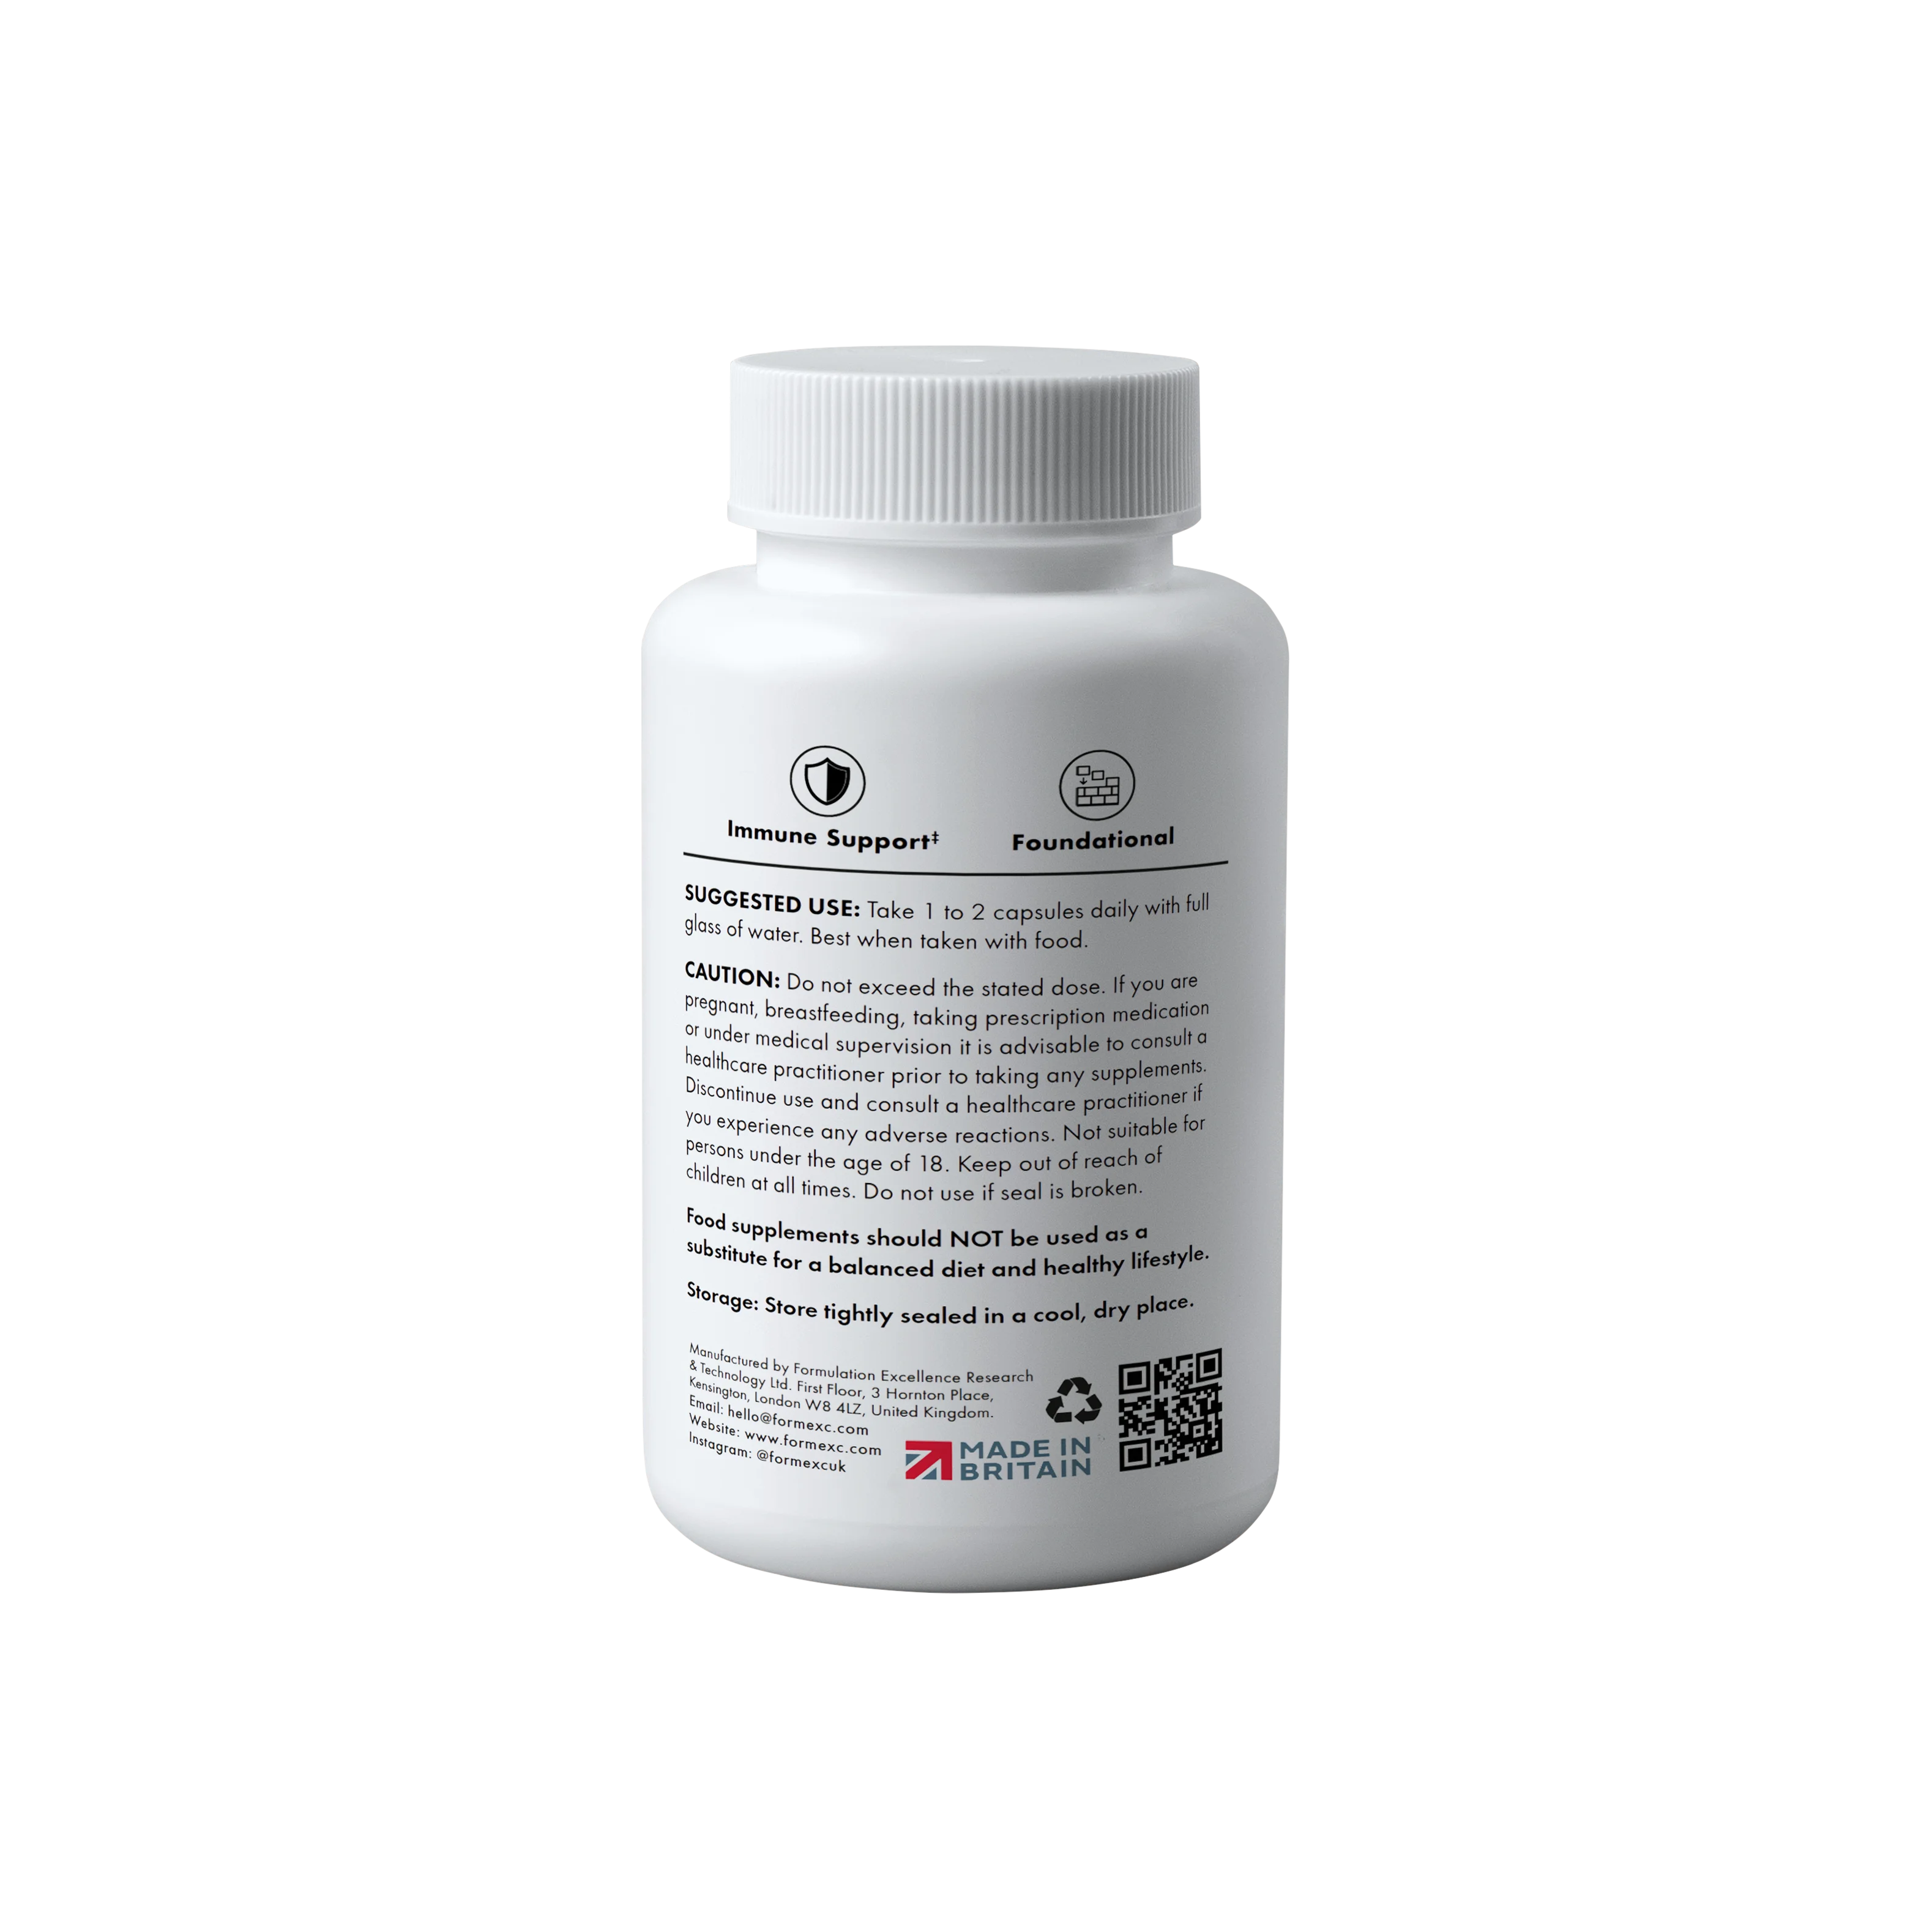 Formexc IMMUNE supplement with natural antioxidants, vitamins and minerals for immunity and vitality.